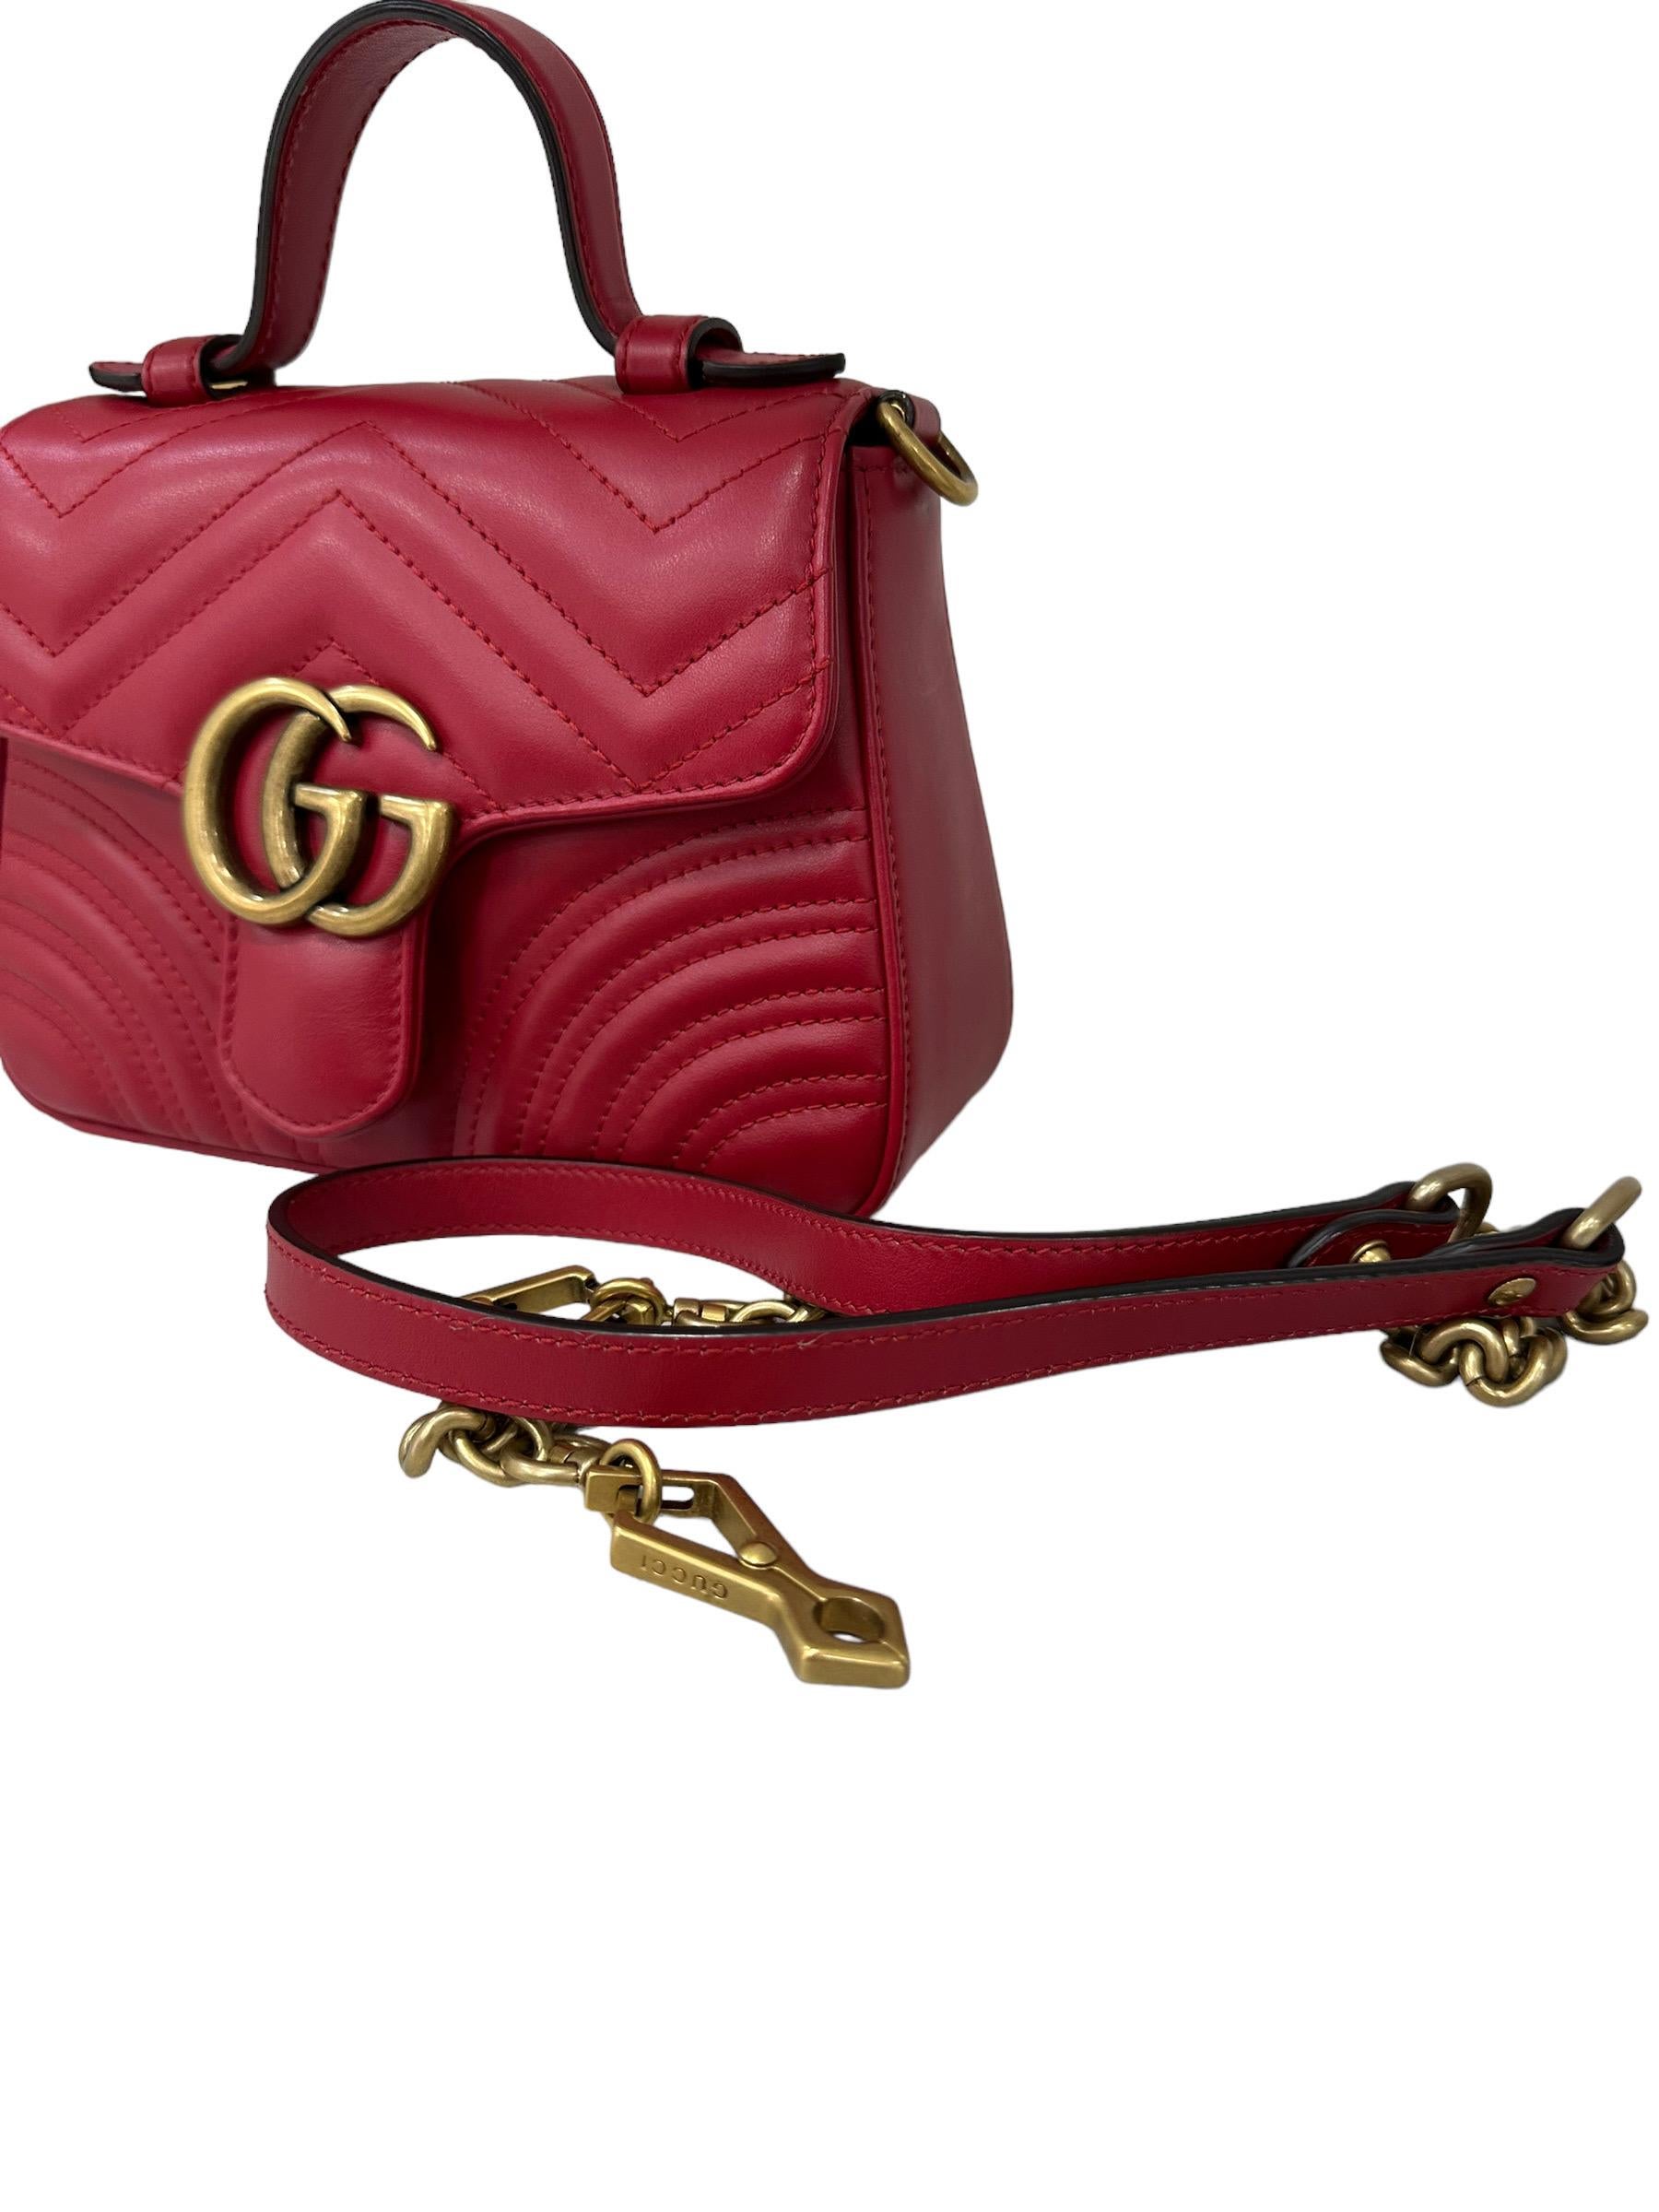 Gucci Marmont 20 Handle Rossa 10